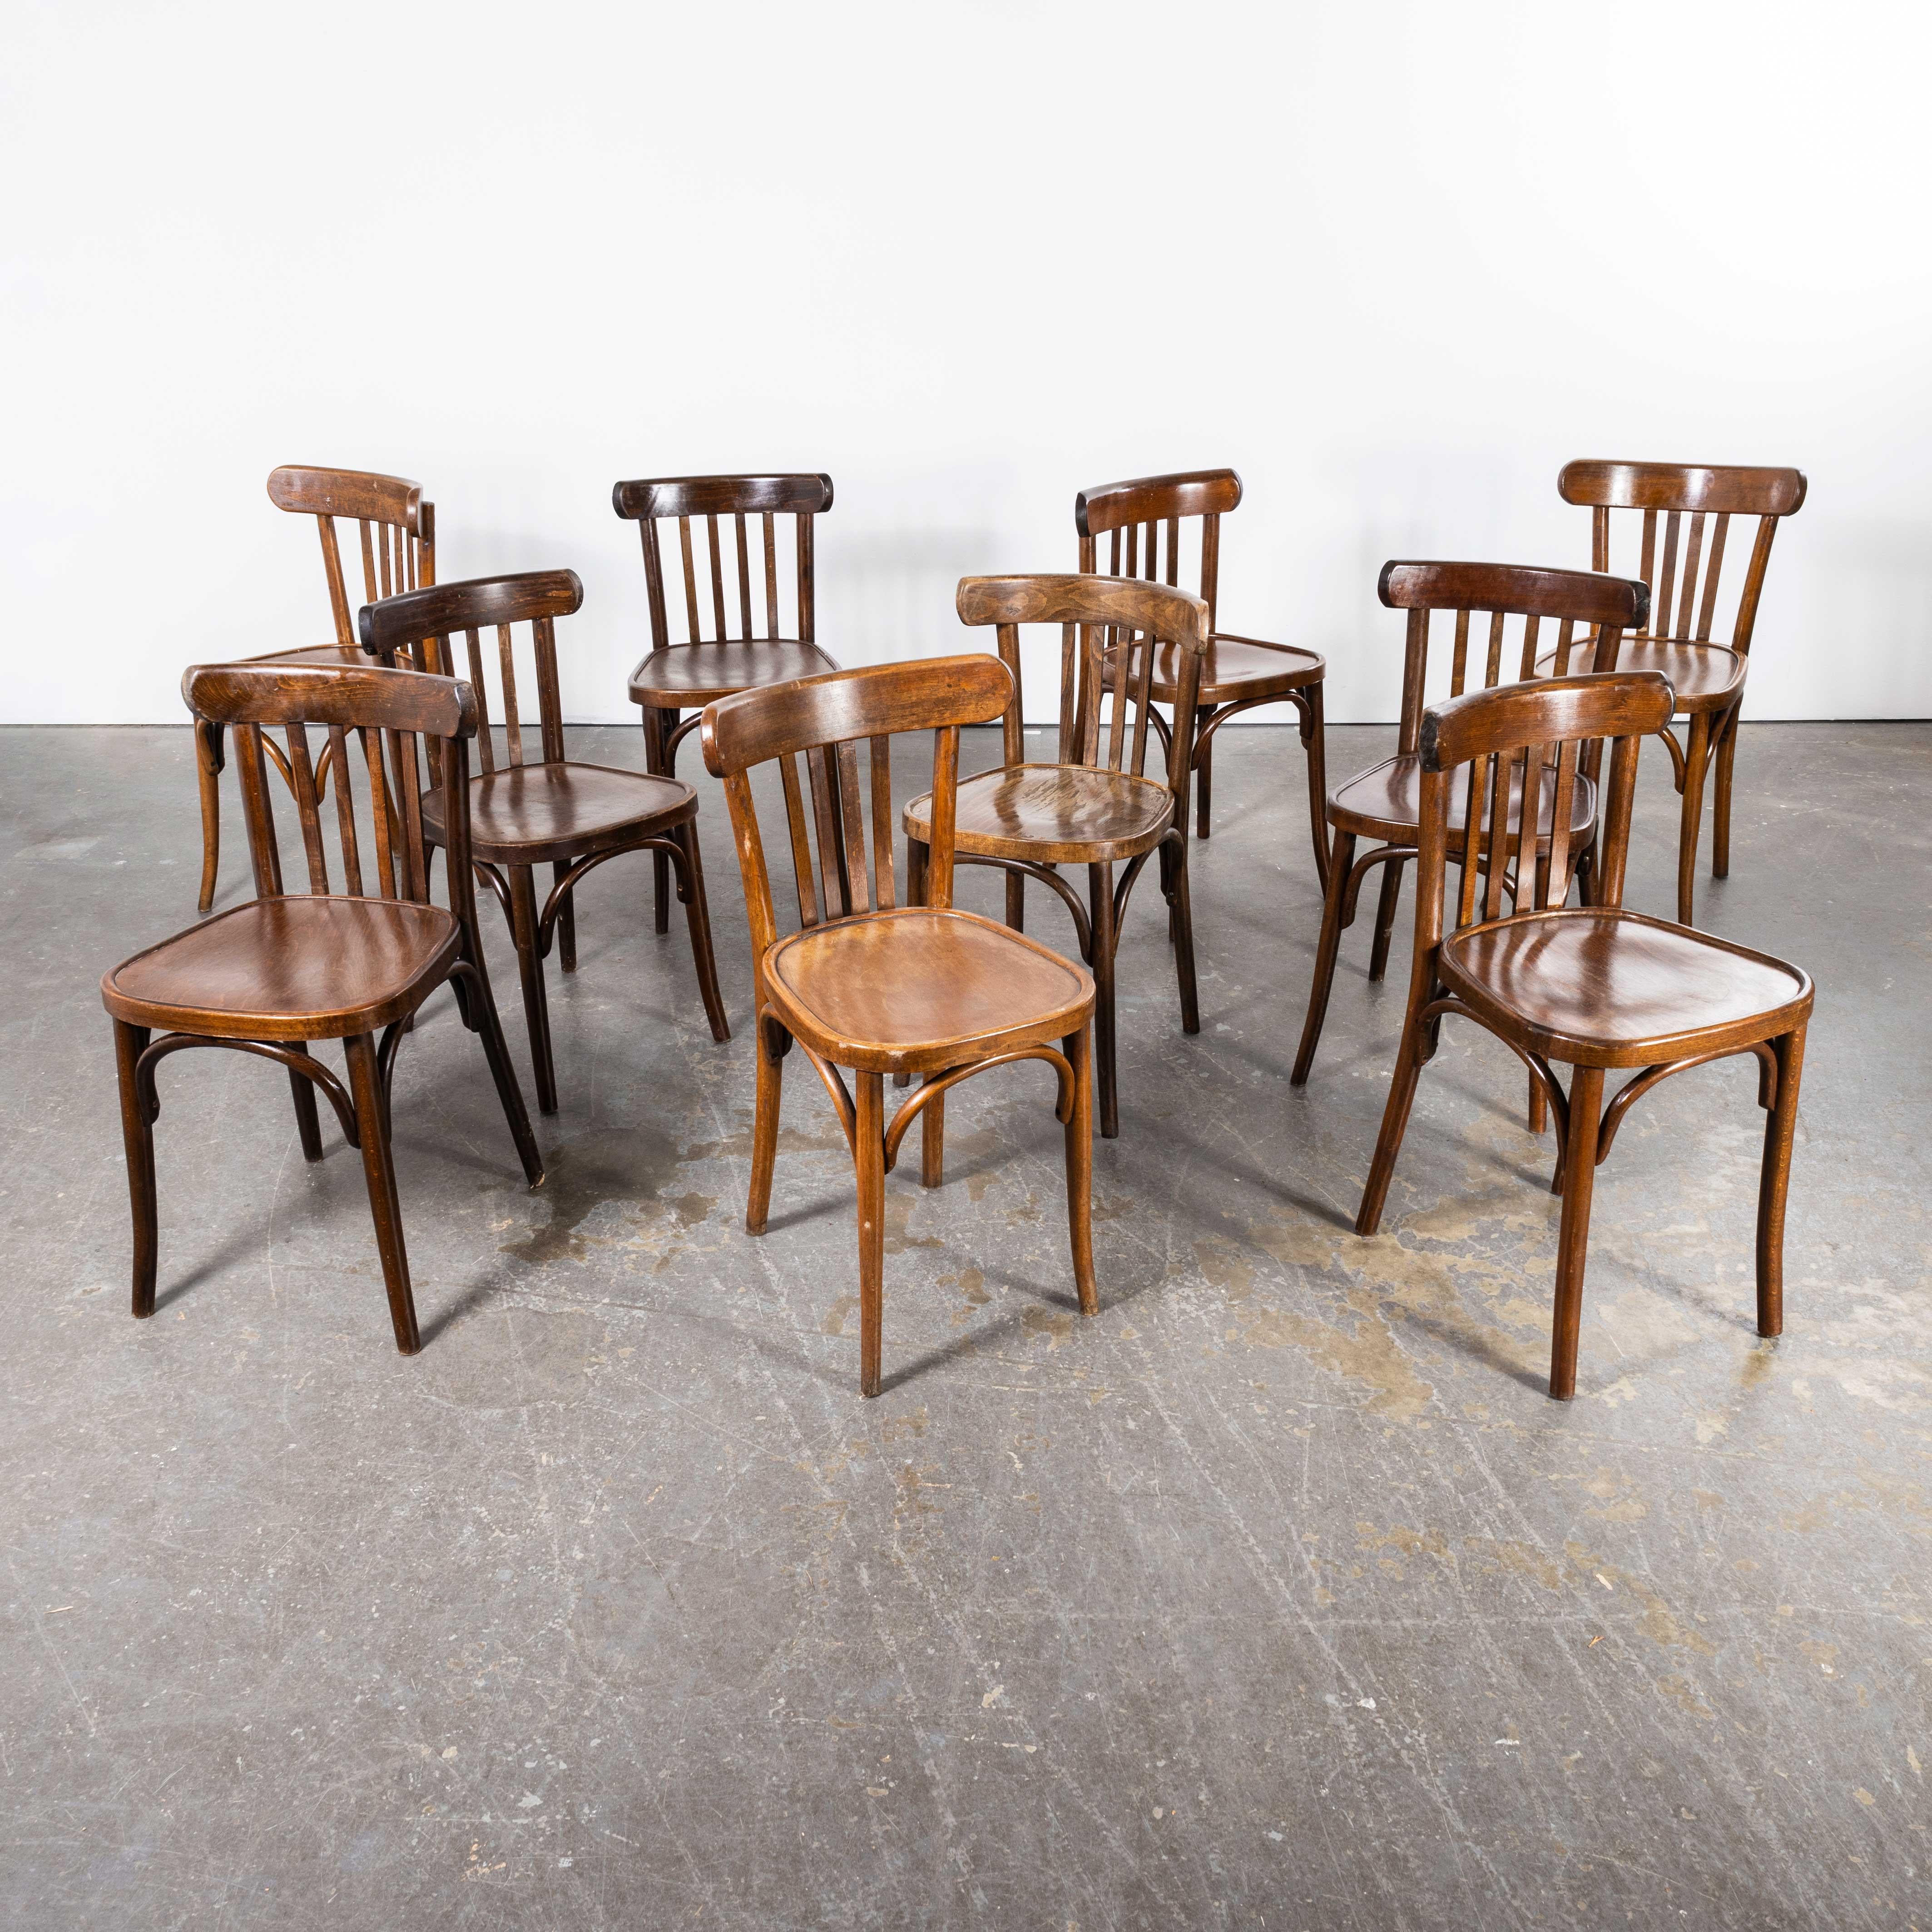 French 1950’s Standard Classic Bistro Mixed Dining Chairs - Large Quantities Available